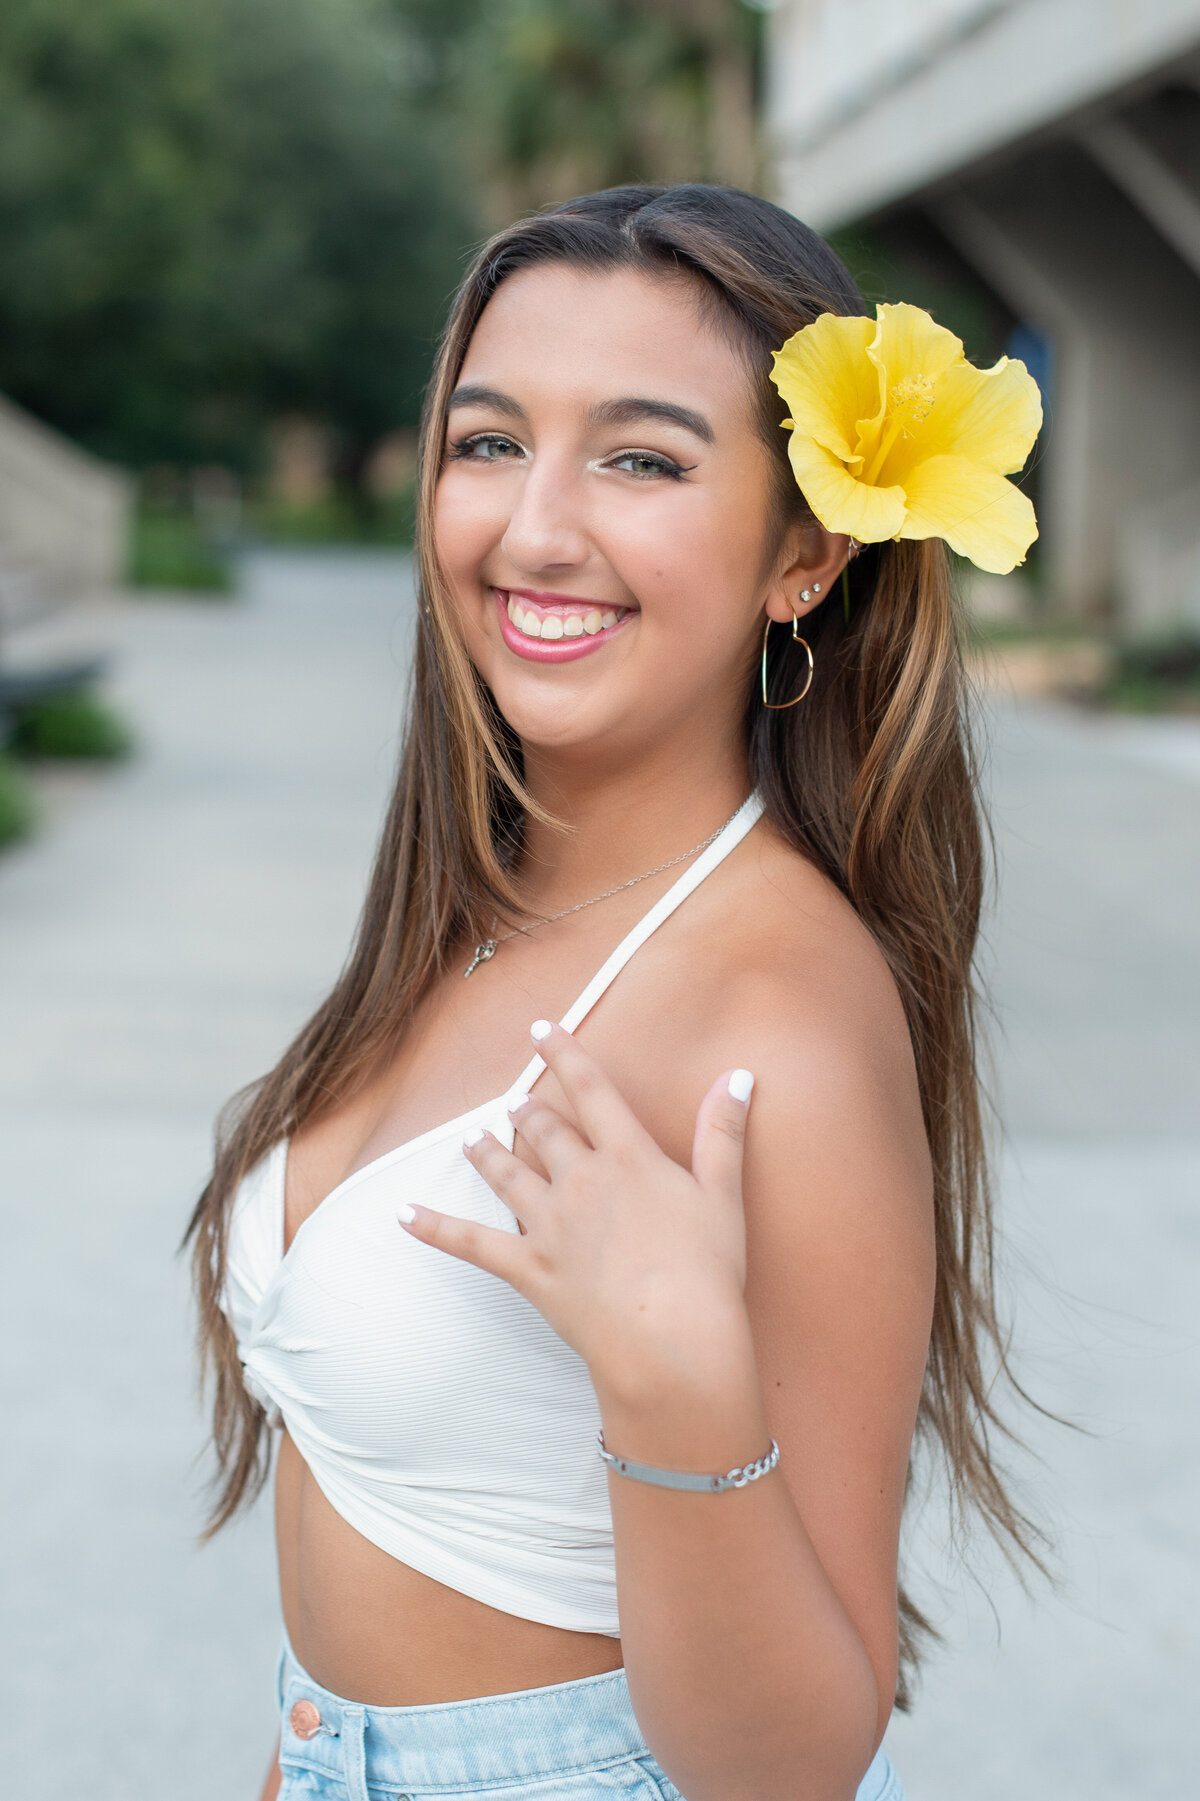 High school senior girl with large yellow flower in hair.